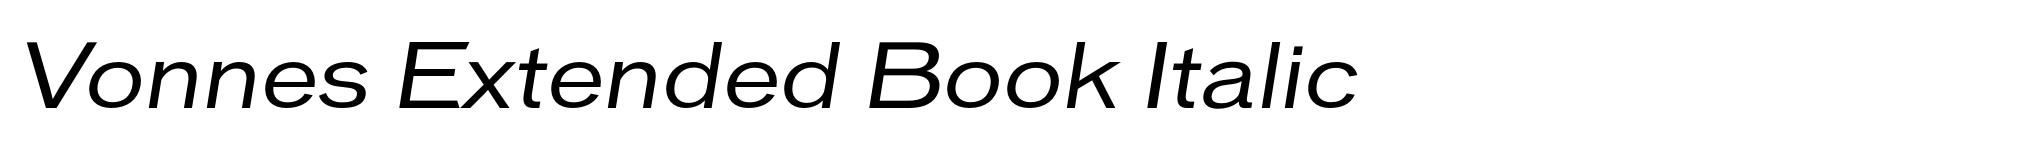 Vonnes Extended Book Italic image